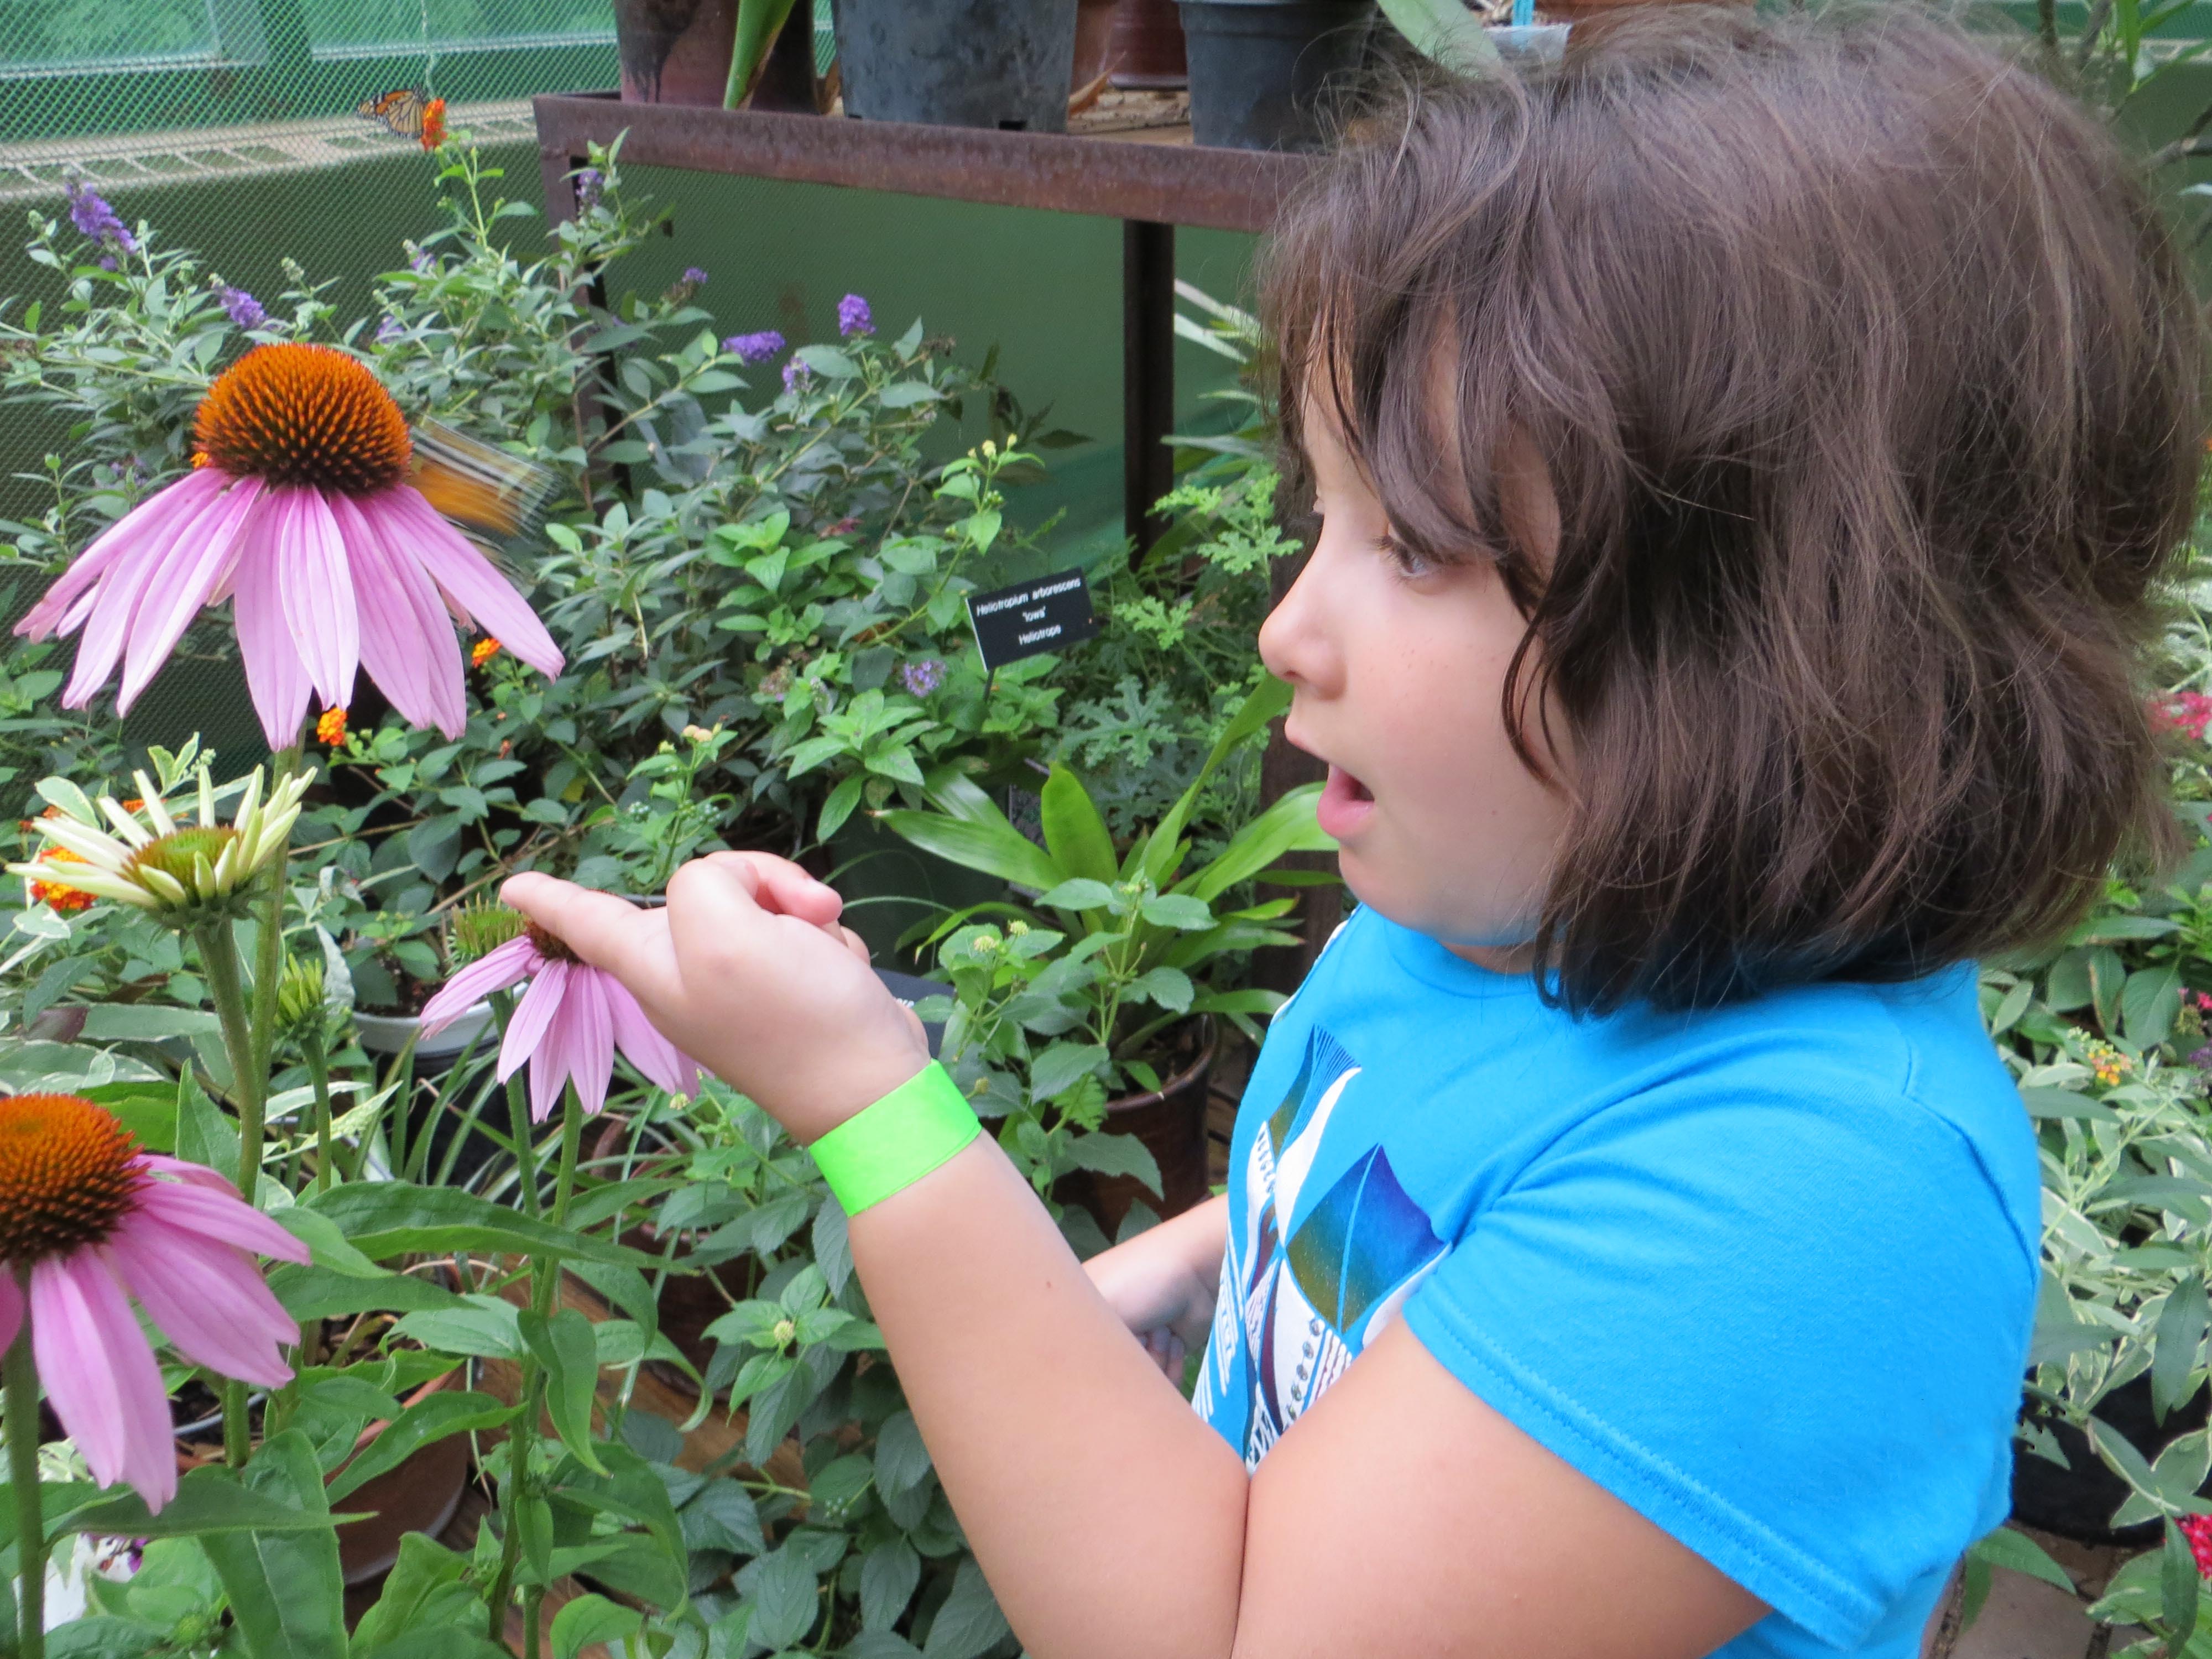 A pollinator garden that attracts butterflies and bees can create a sense of wonder and connect youth with nature. (NDSU photo)